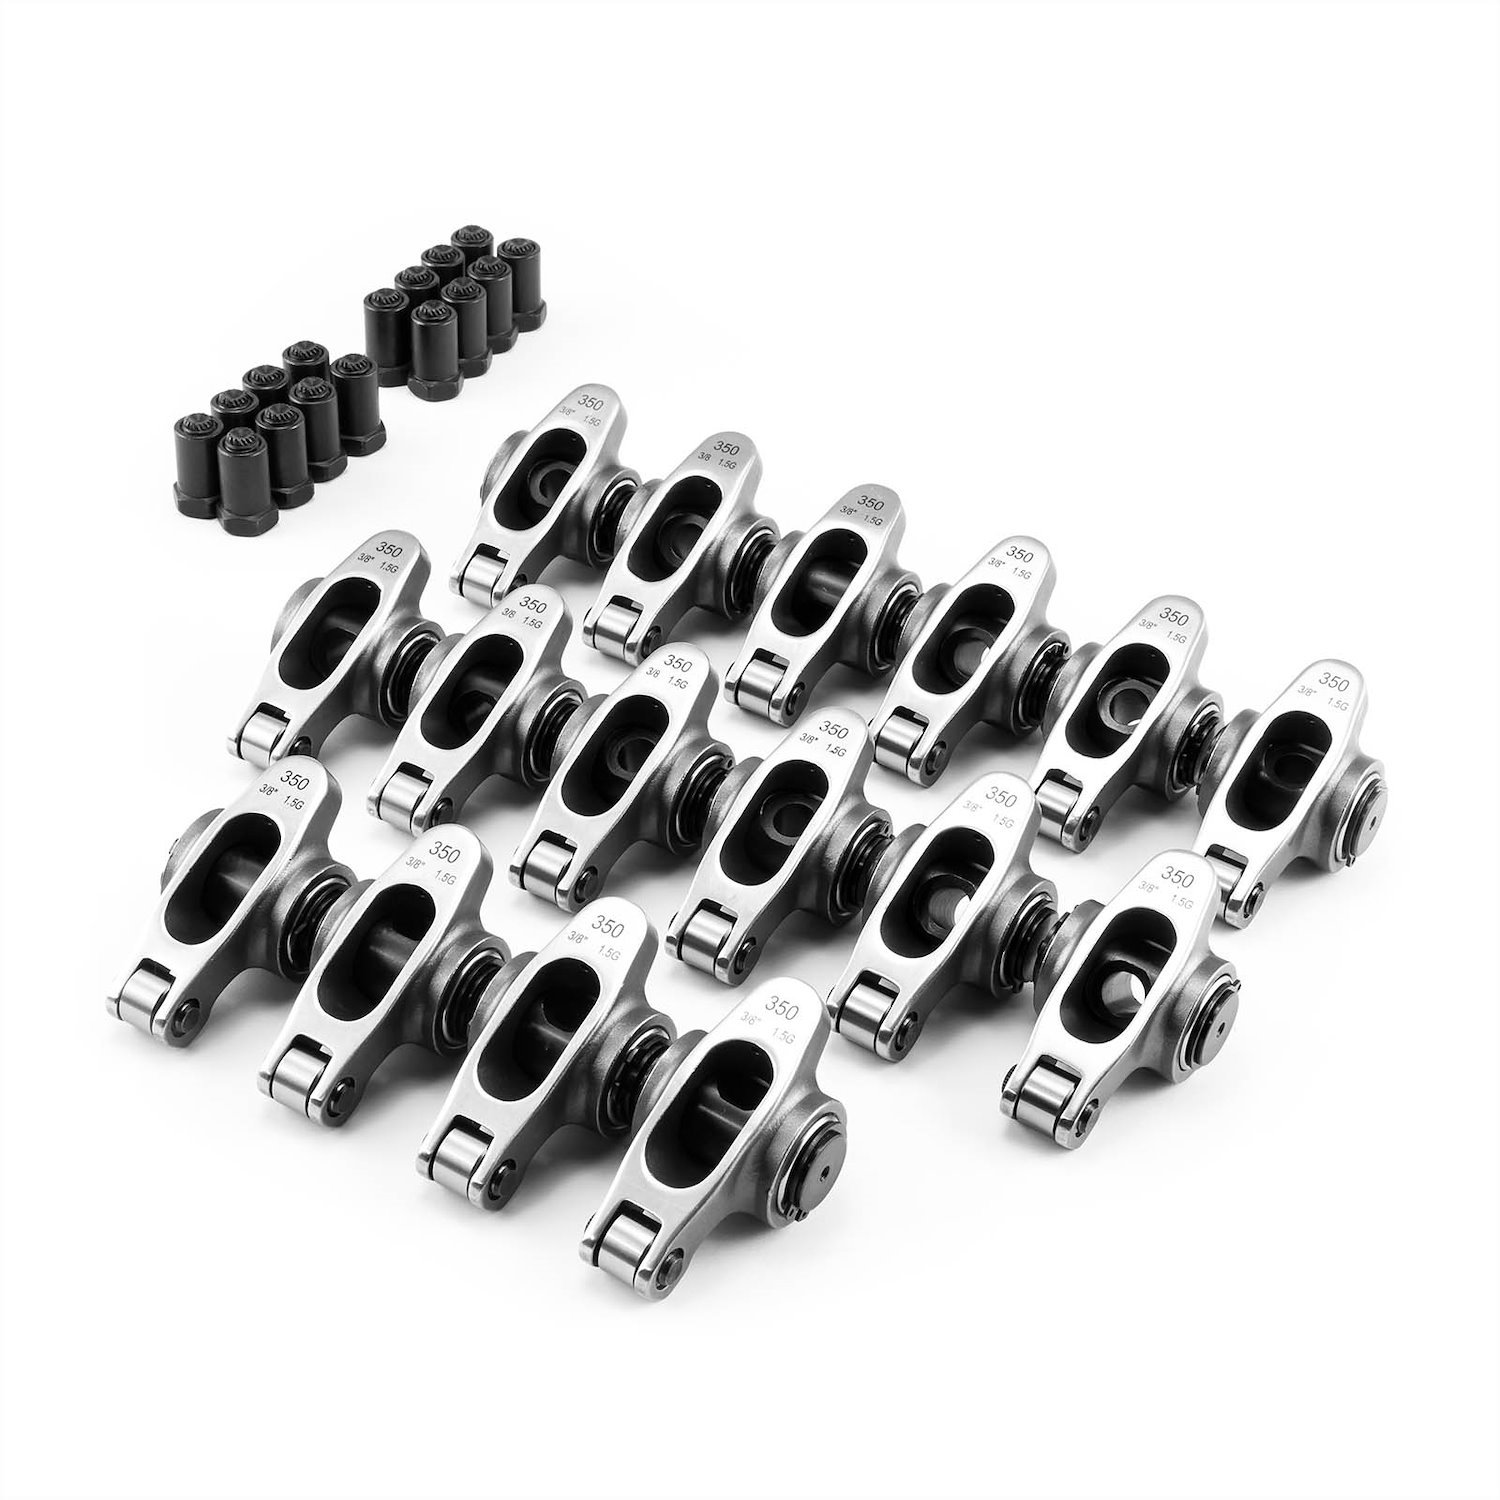 Stainless Steel Roller Rocker Arm Set Small Block Chevy 350, Ratio: 1.5